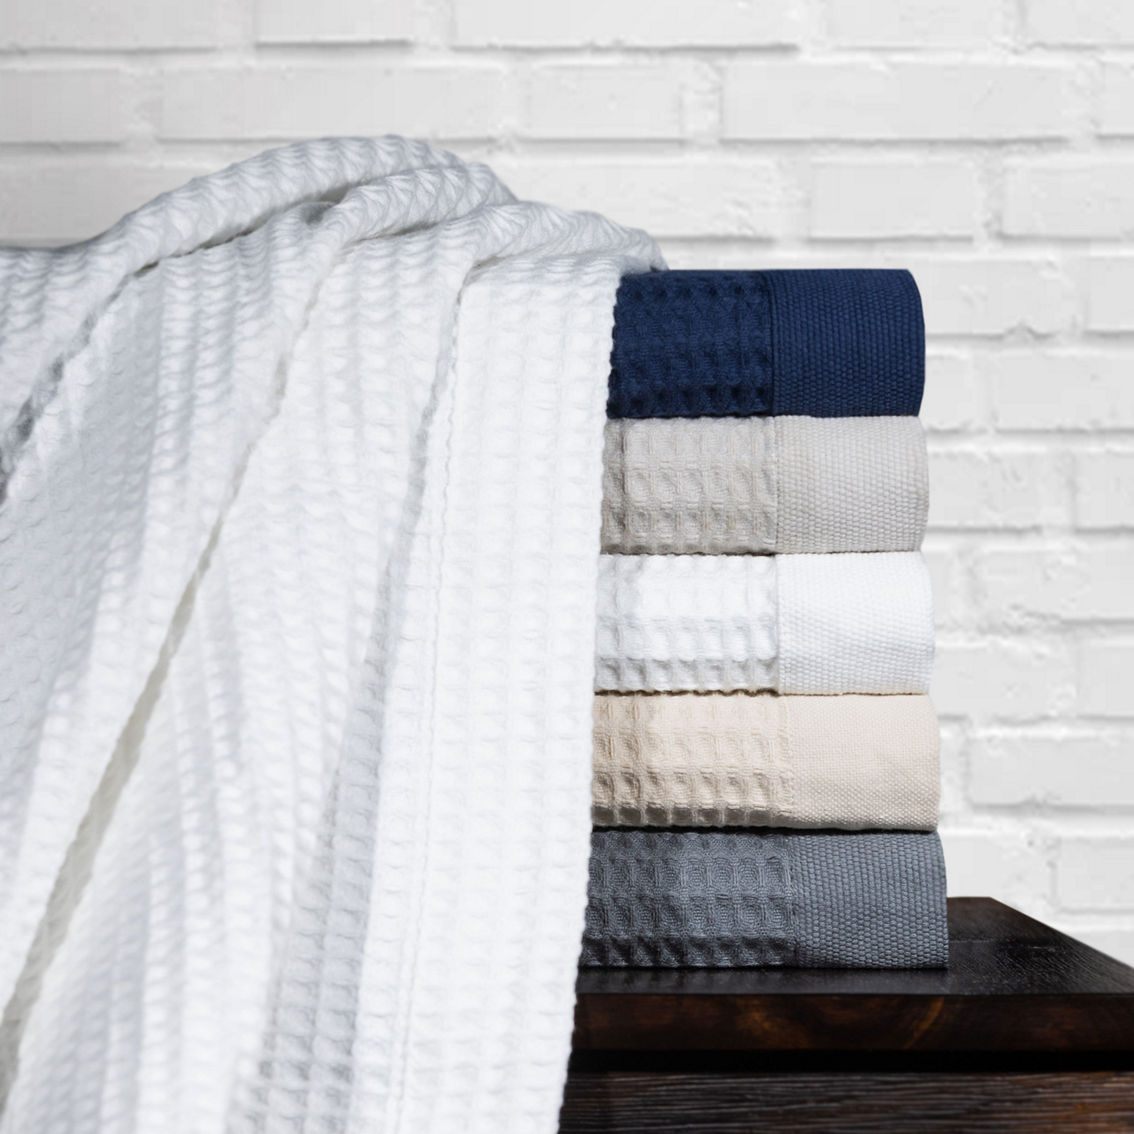 Pointehaven 300 GSM Long Staple Soft Cotton Hypoallergenic Waffle Weave Blanket - Image 2 of 4